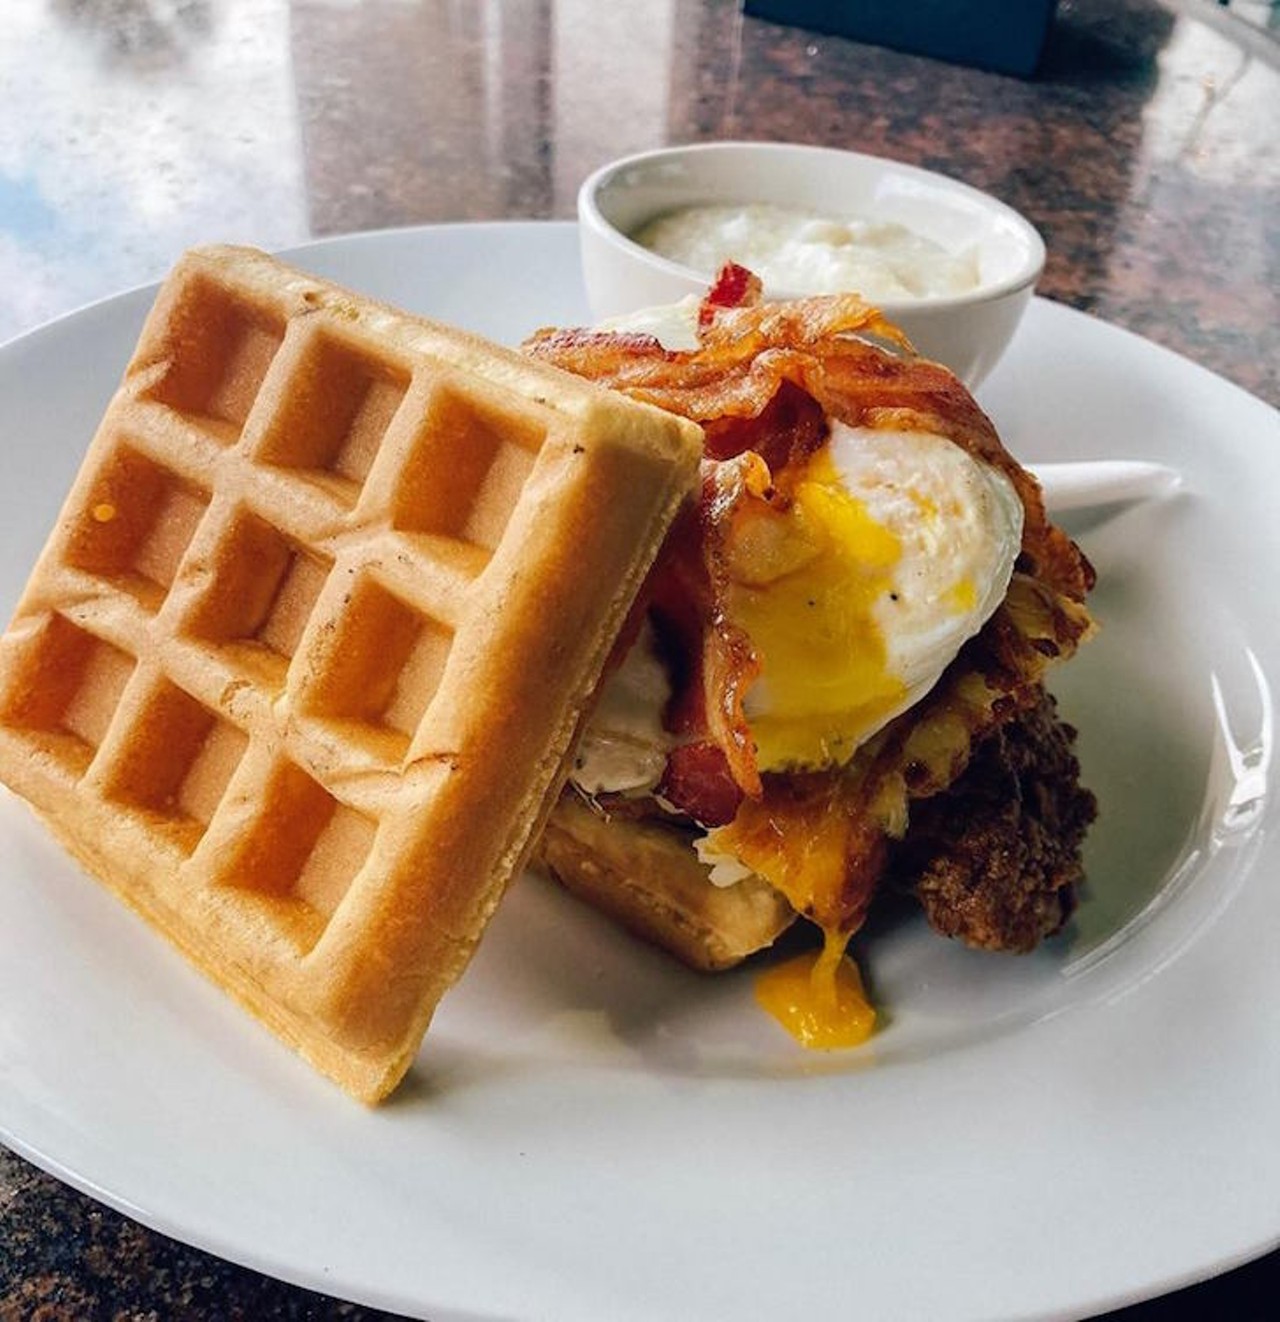 12 Fast-Food Breakfast Deals That Make It Easier To Wake Up